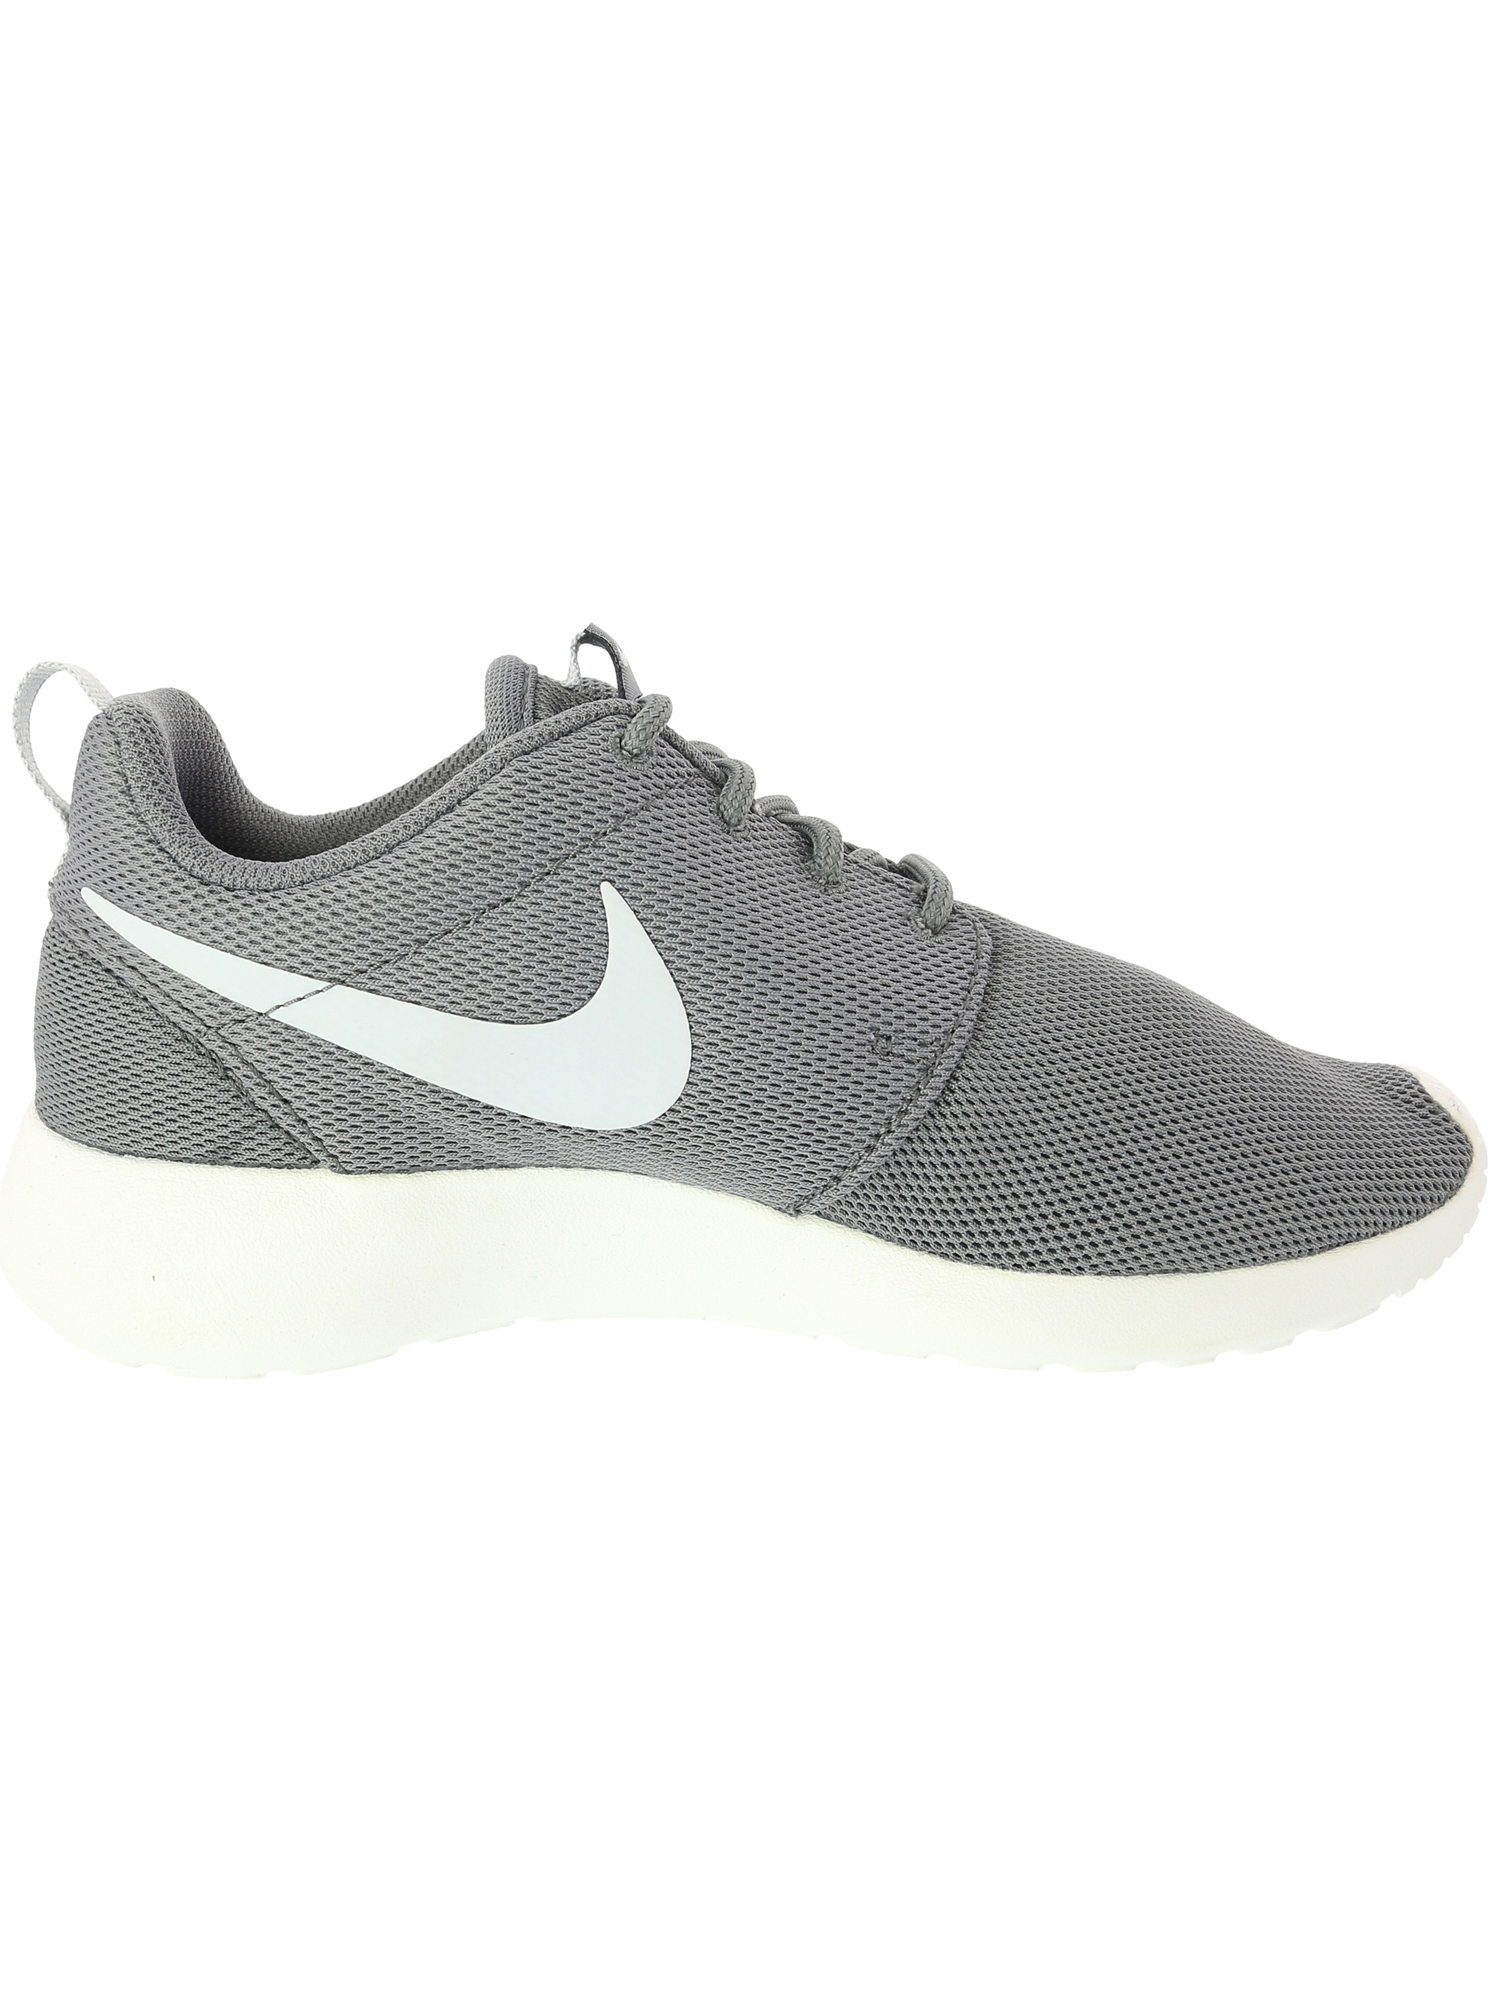 Nike Women's Roshe One Cool Grey/Pure Platinum Ankle-High Cotton Fashion Sneaker - 6M - image 2 of 3